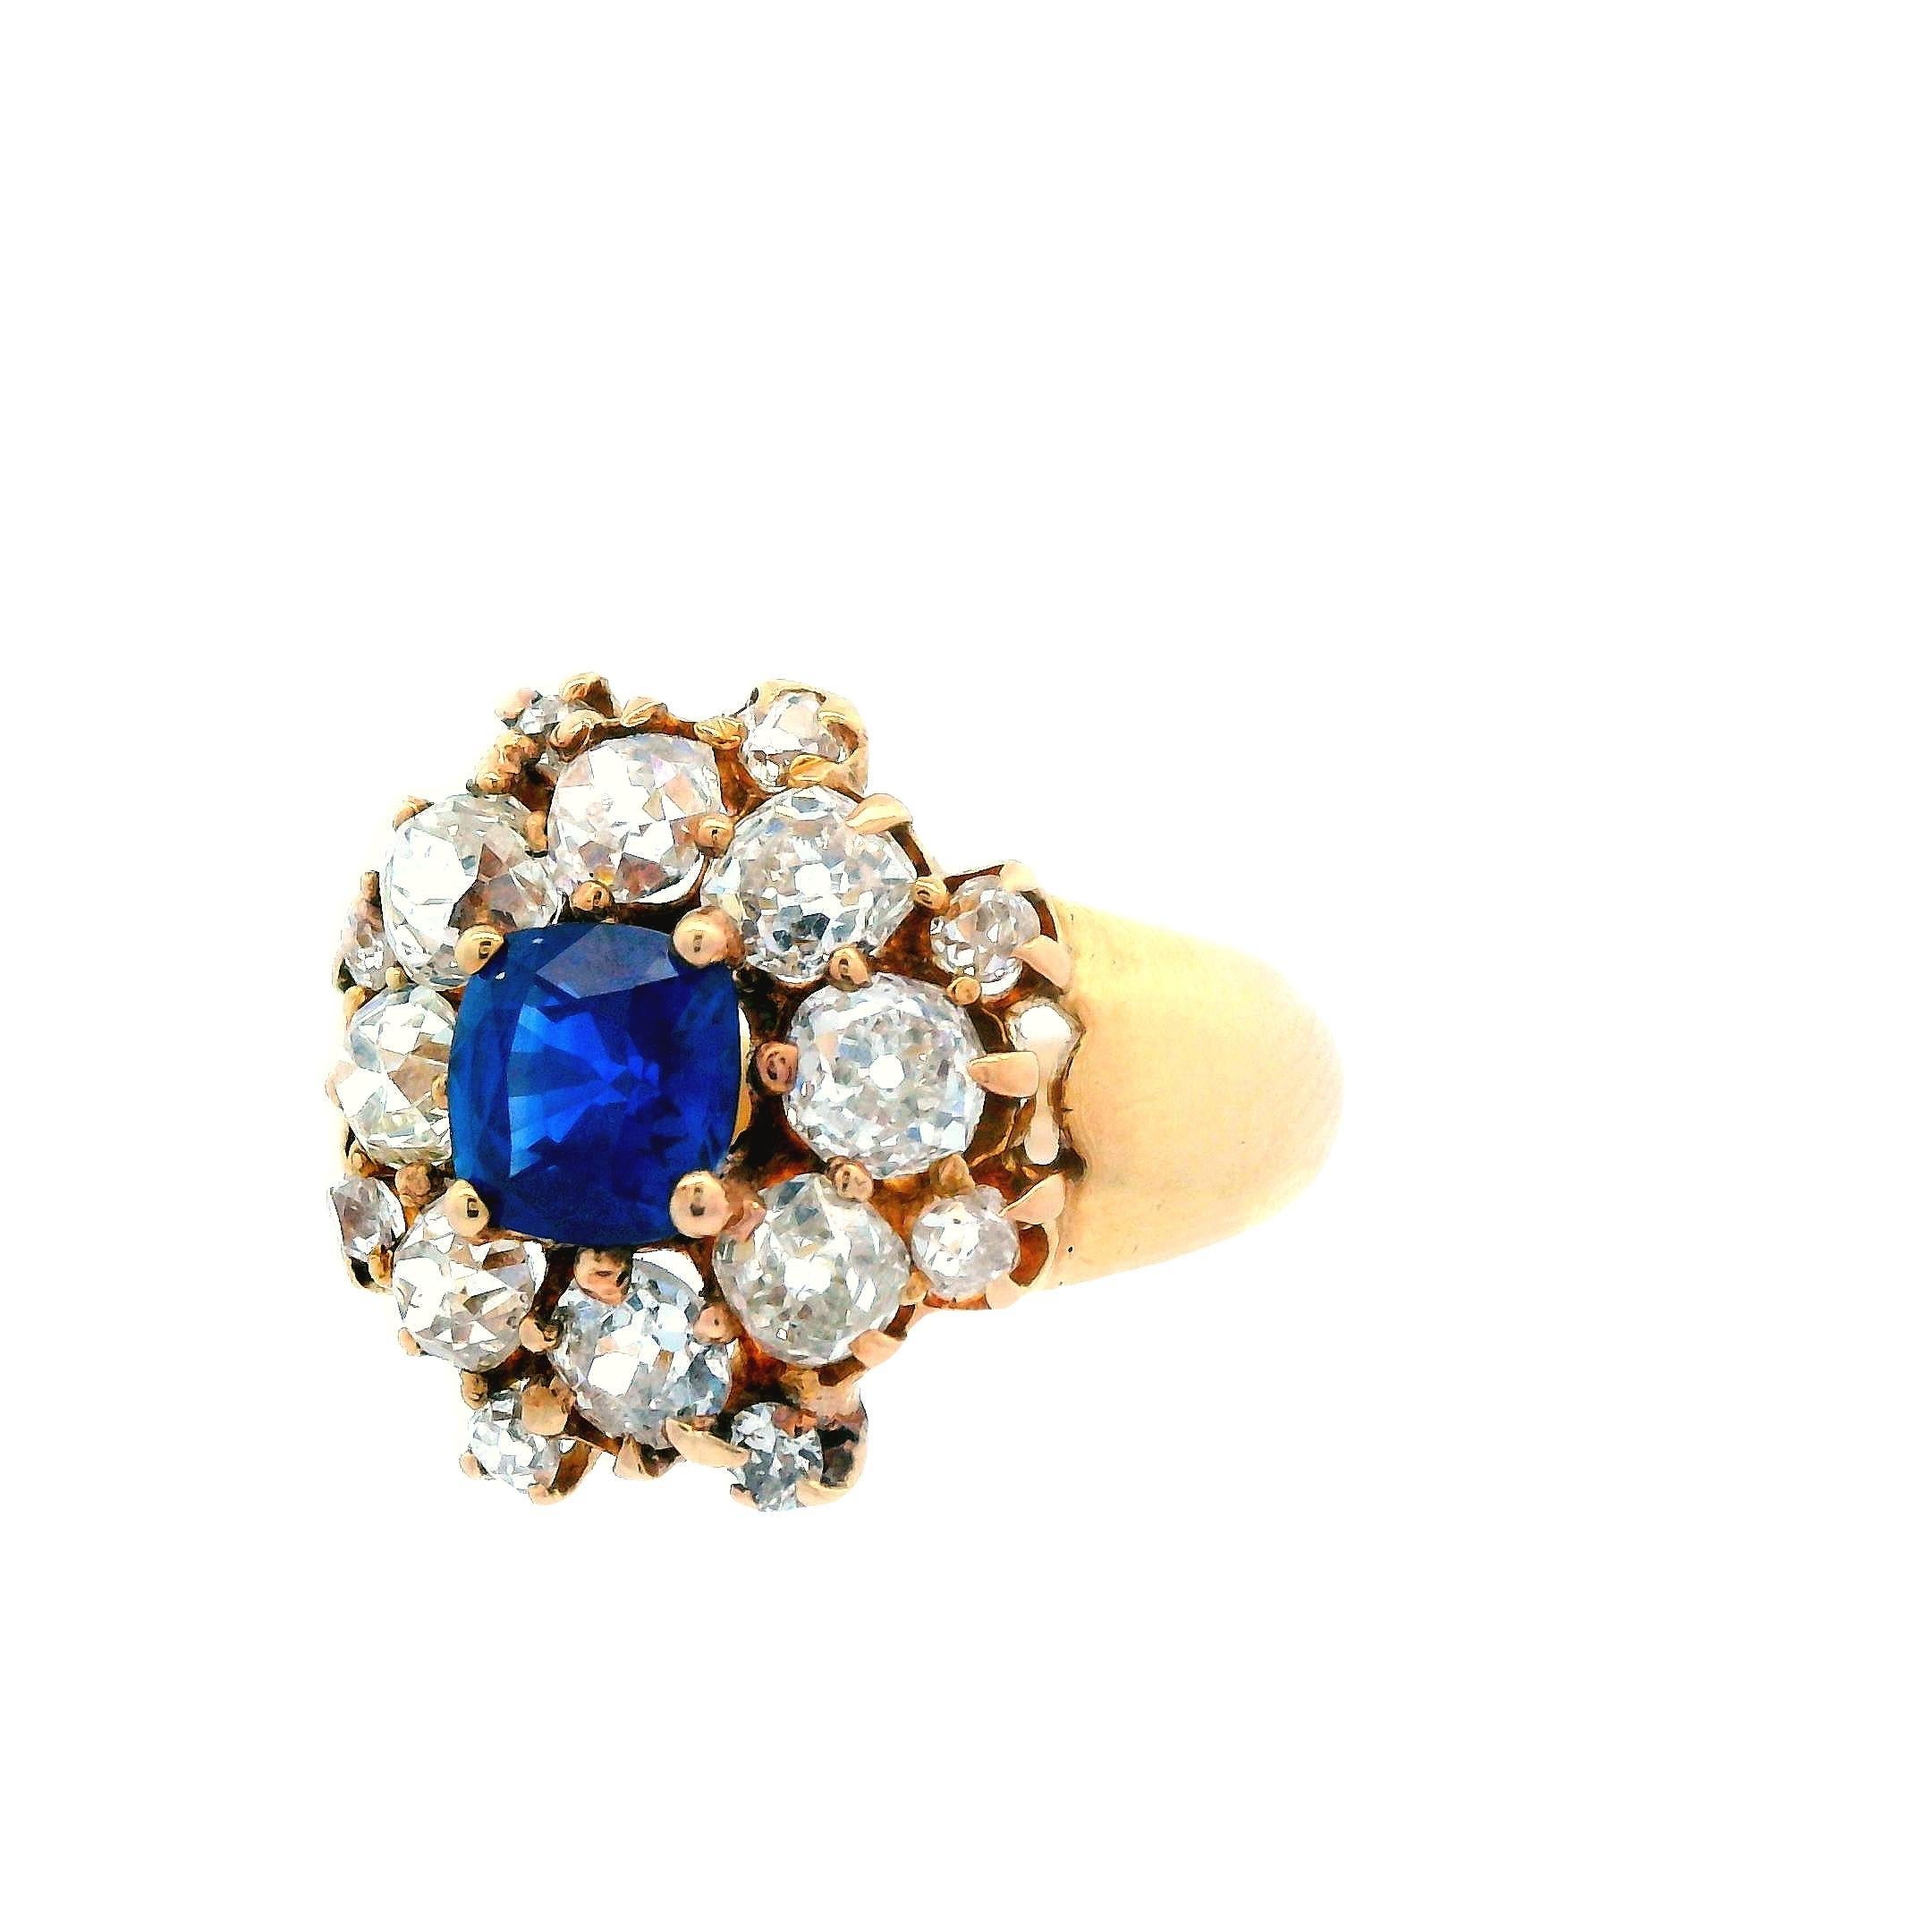 1890 Victorian 18K Yellow Gold Sapphire and Diamond Ring In Good Condition For Sale In Lexington, KY